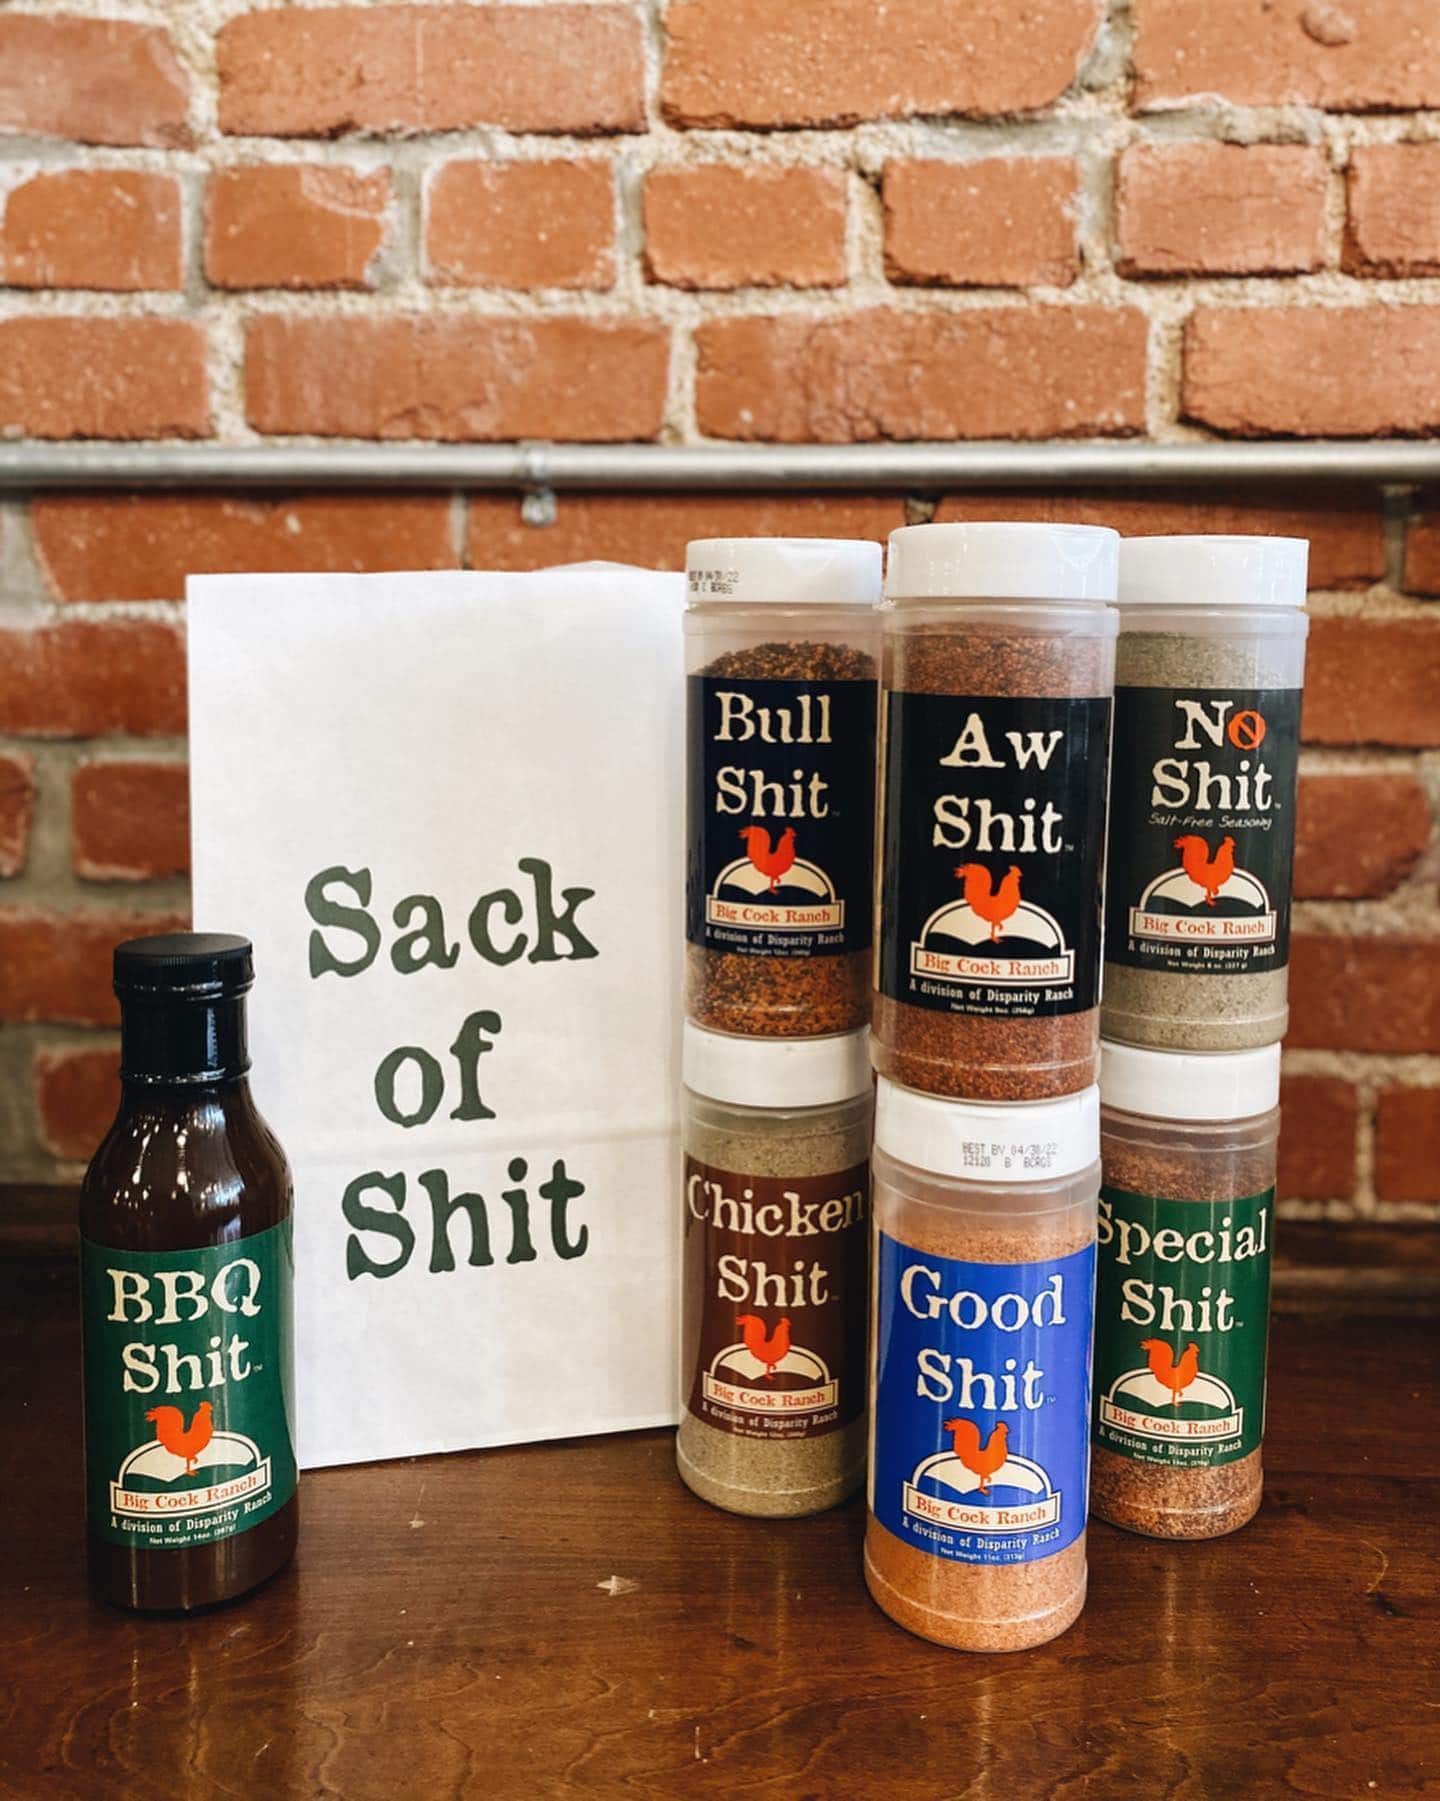  Aw Shit Hot n' Spicy Seasoning from Big Cock Ranch